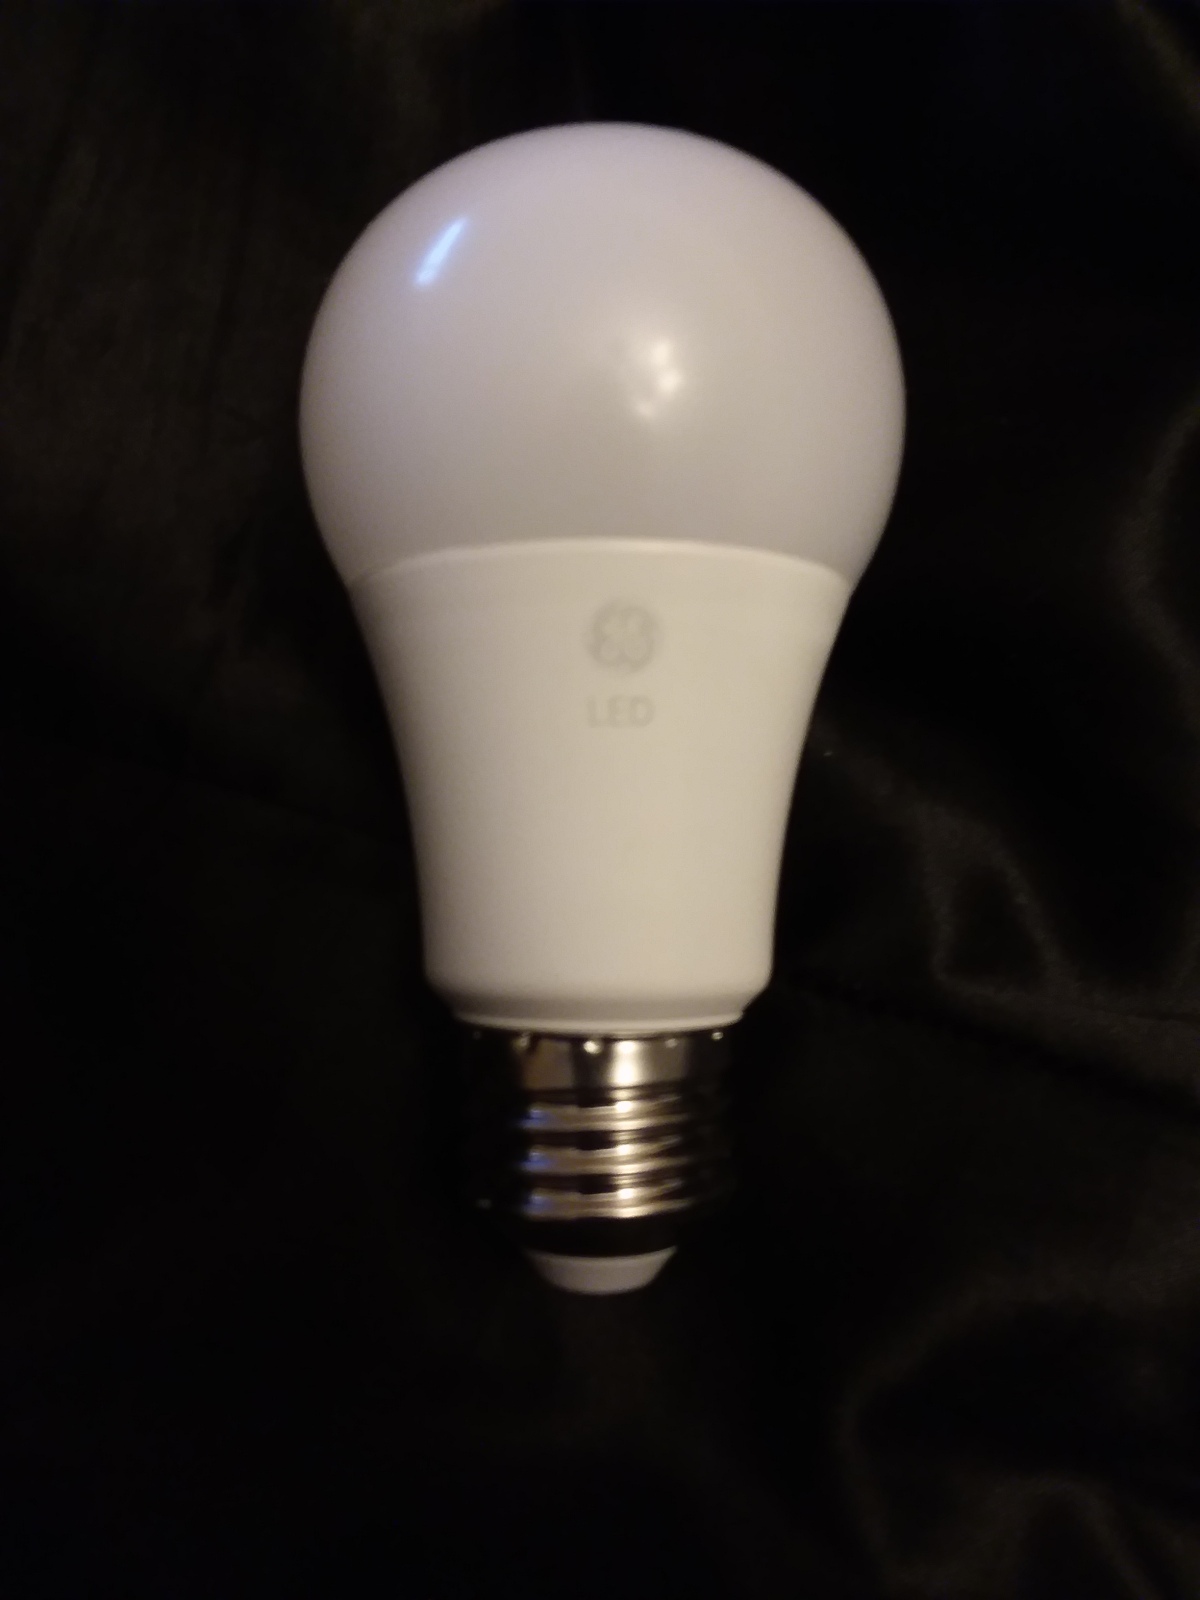 32 Save on Green Energy, Buy LED: Review of GE’s 10 W Dimmable A19 Light Bulb